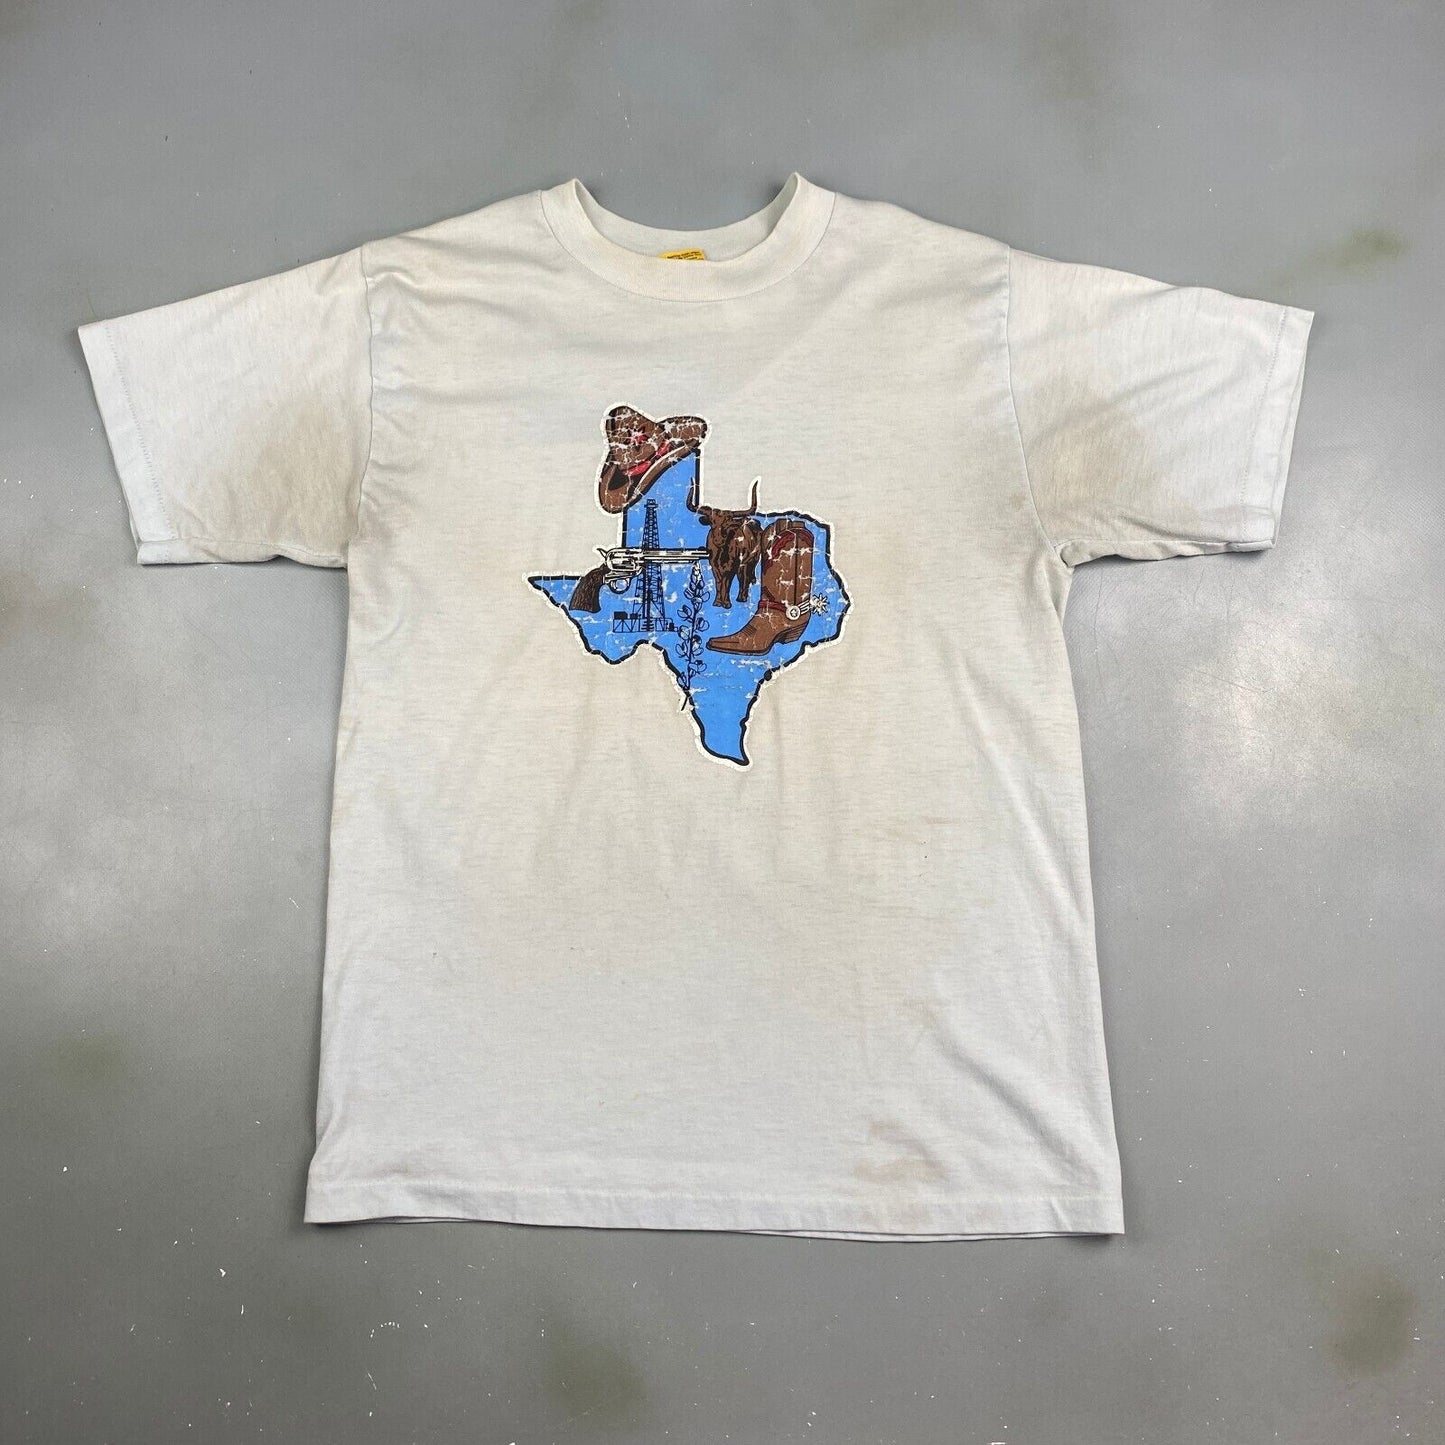 VINTAGE 70s/80s Texas State Faded Light Blue T-Shirt sz Small Men Adult